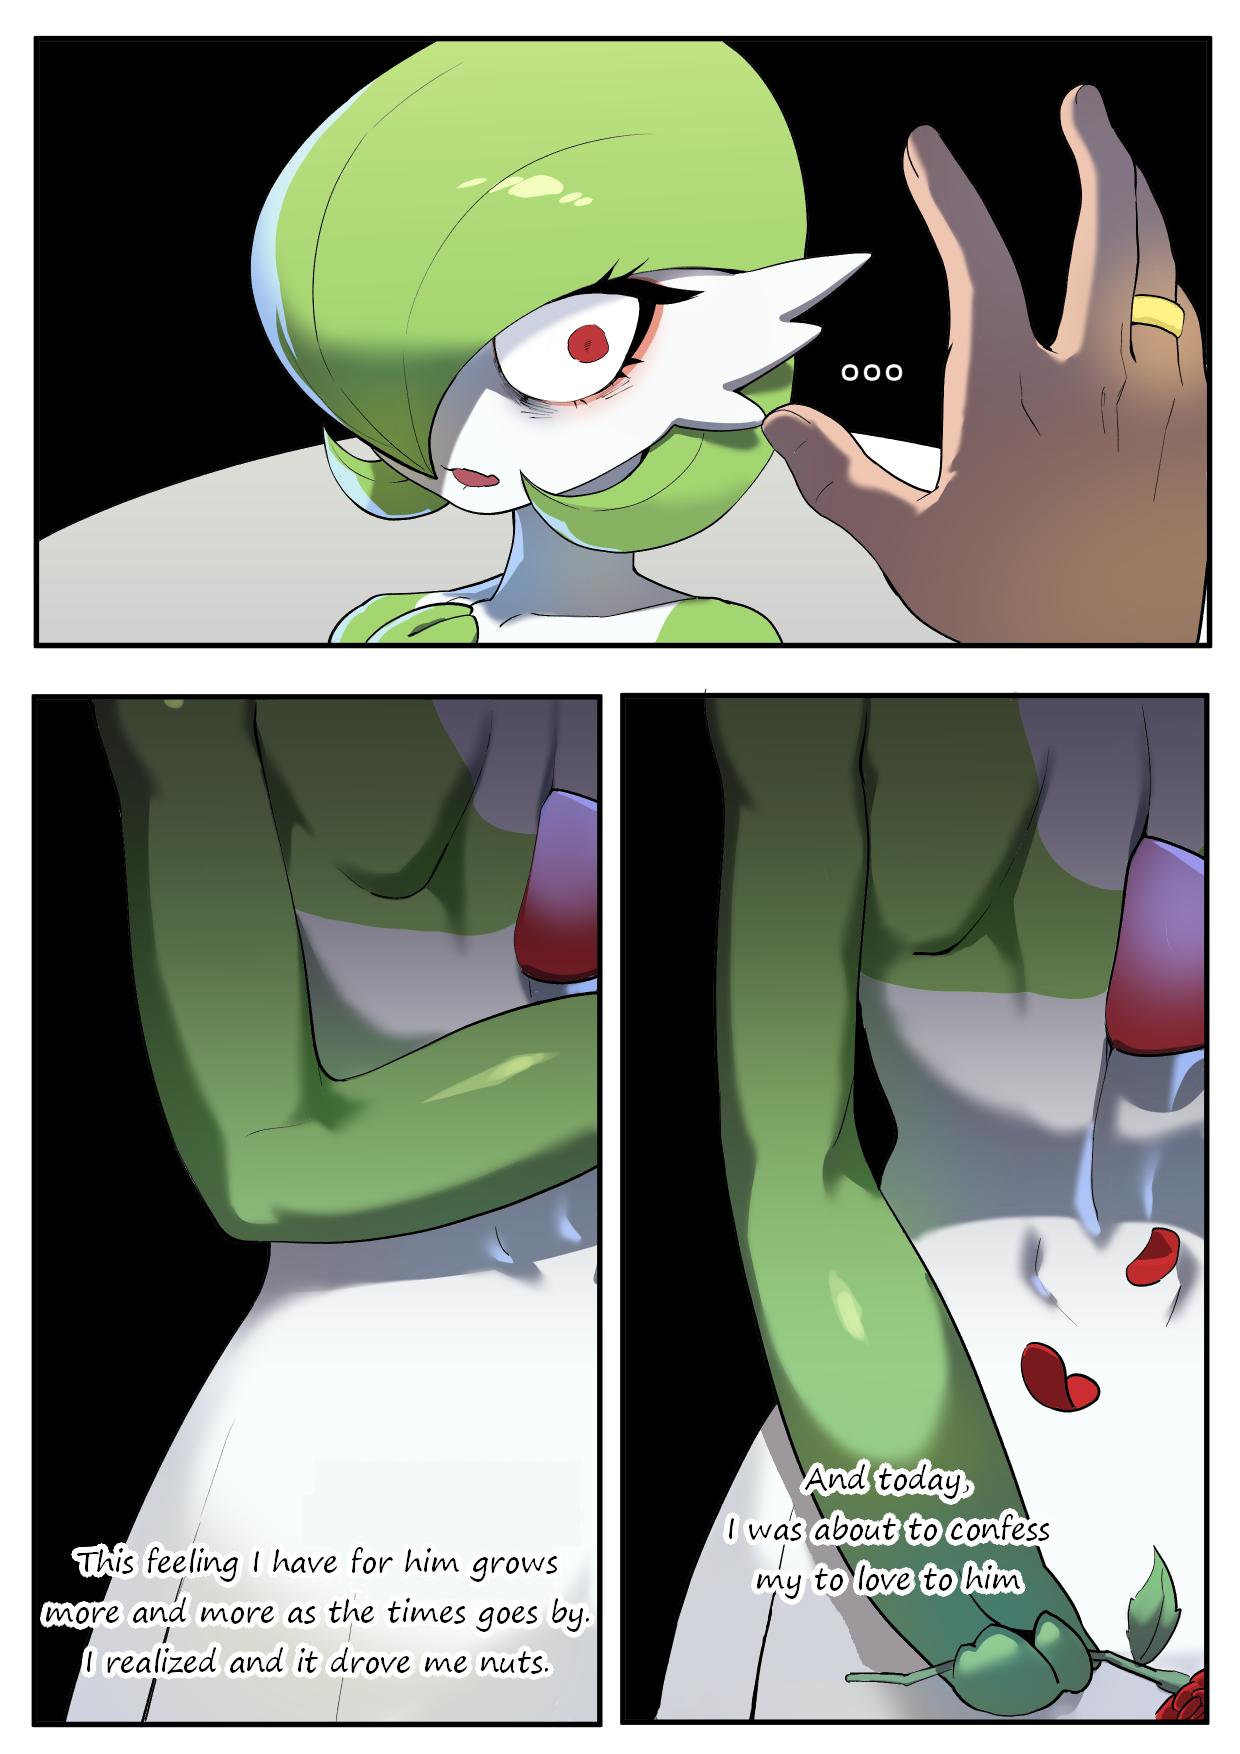 Best Blowjobs Ever The Gardevior that loved her trainer too much - Pokemon | pocket monsters Cumshot - Page 3